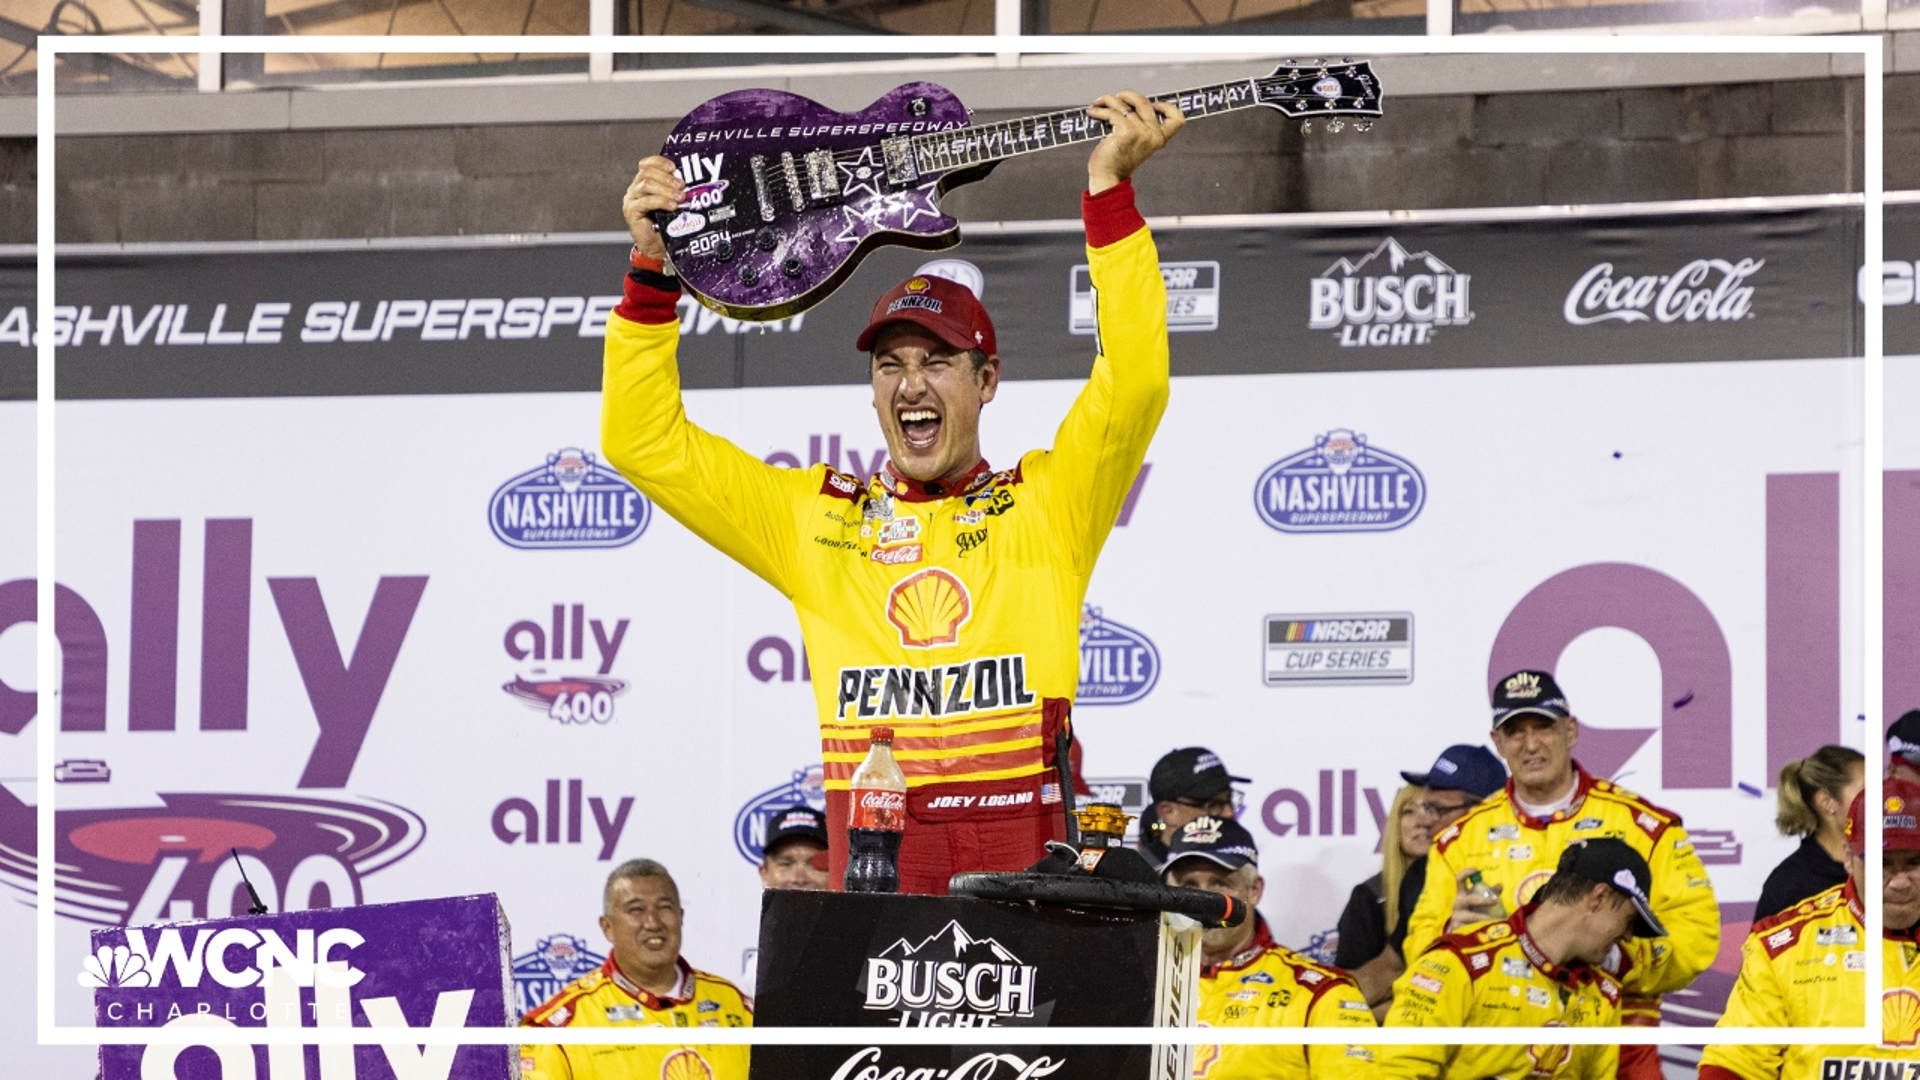 Logano won after stretching his fuel over 100 laps and through five overtime restarts.